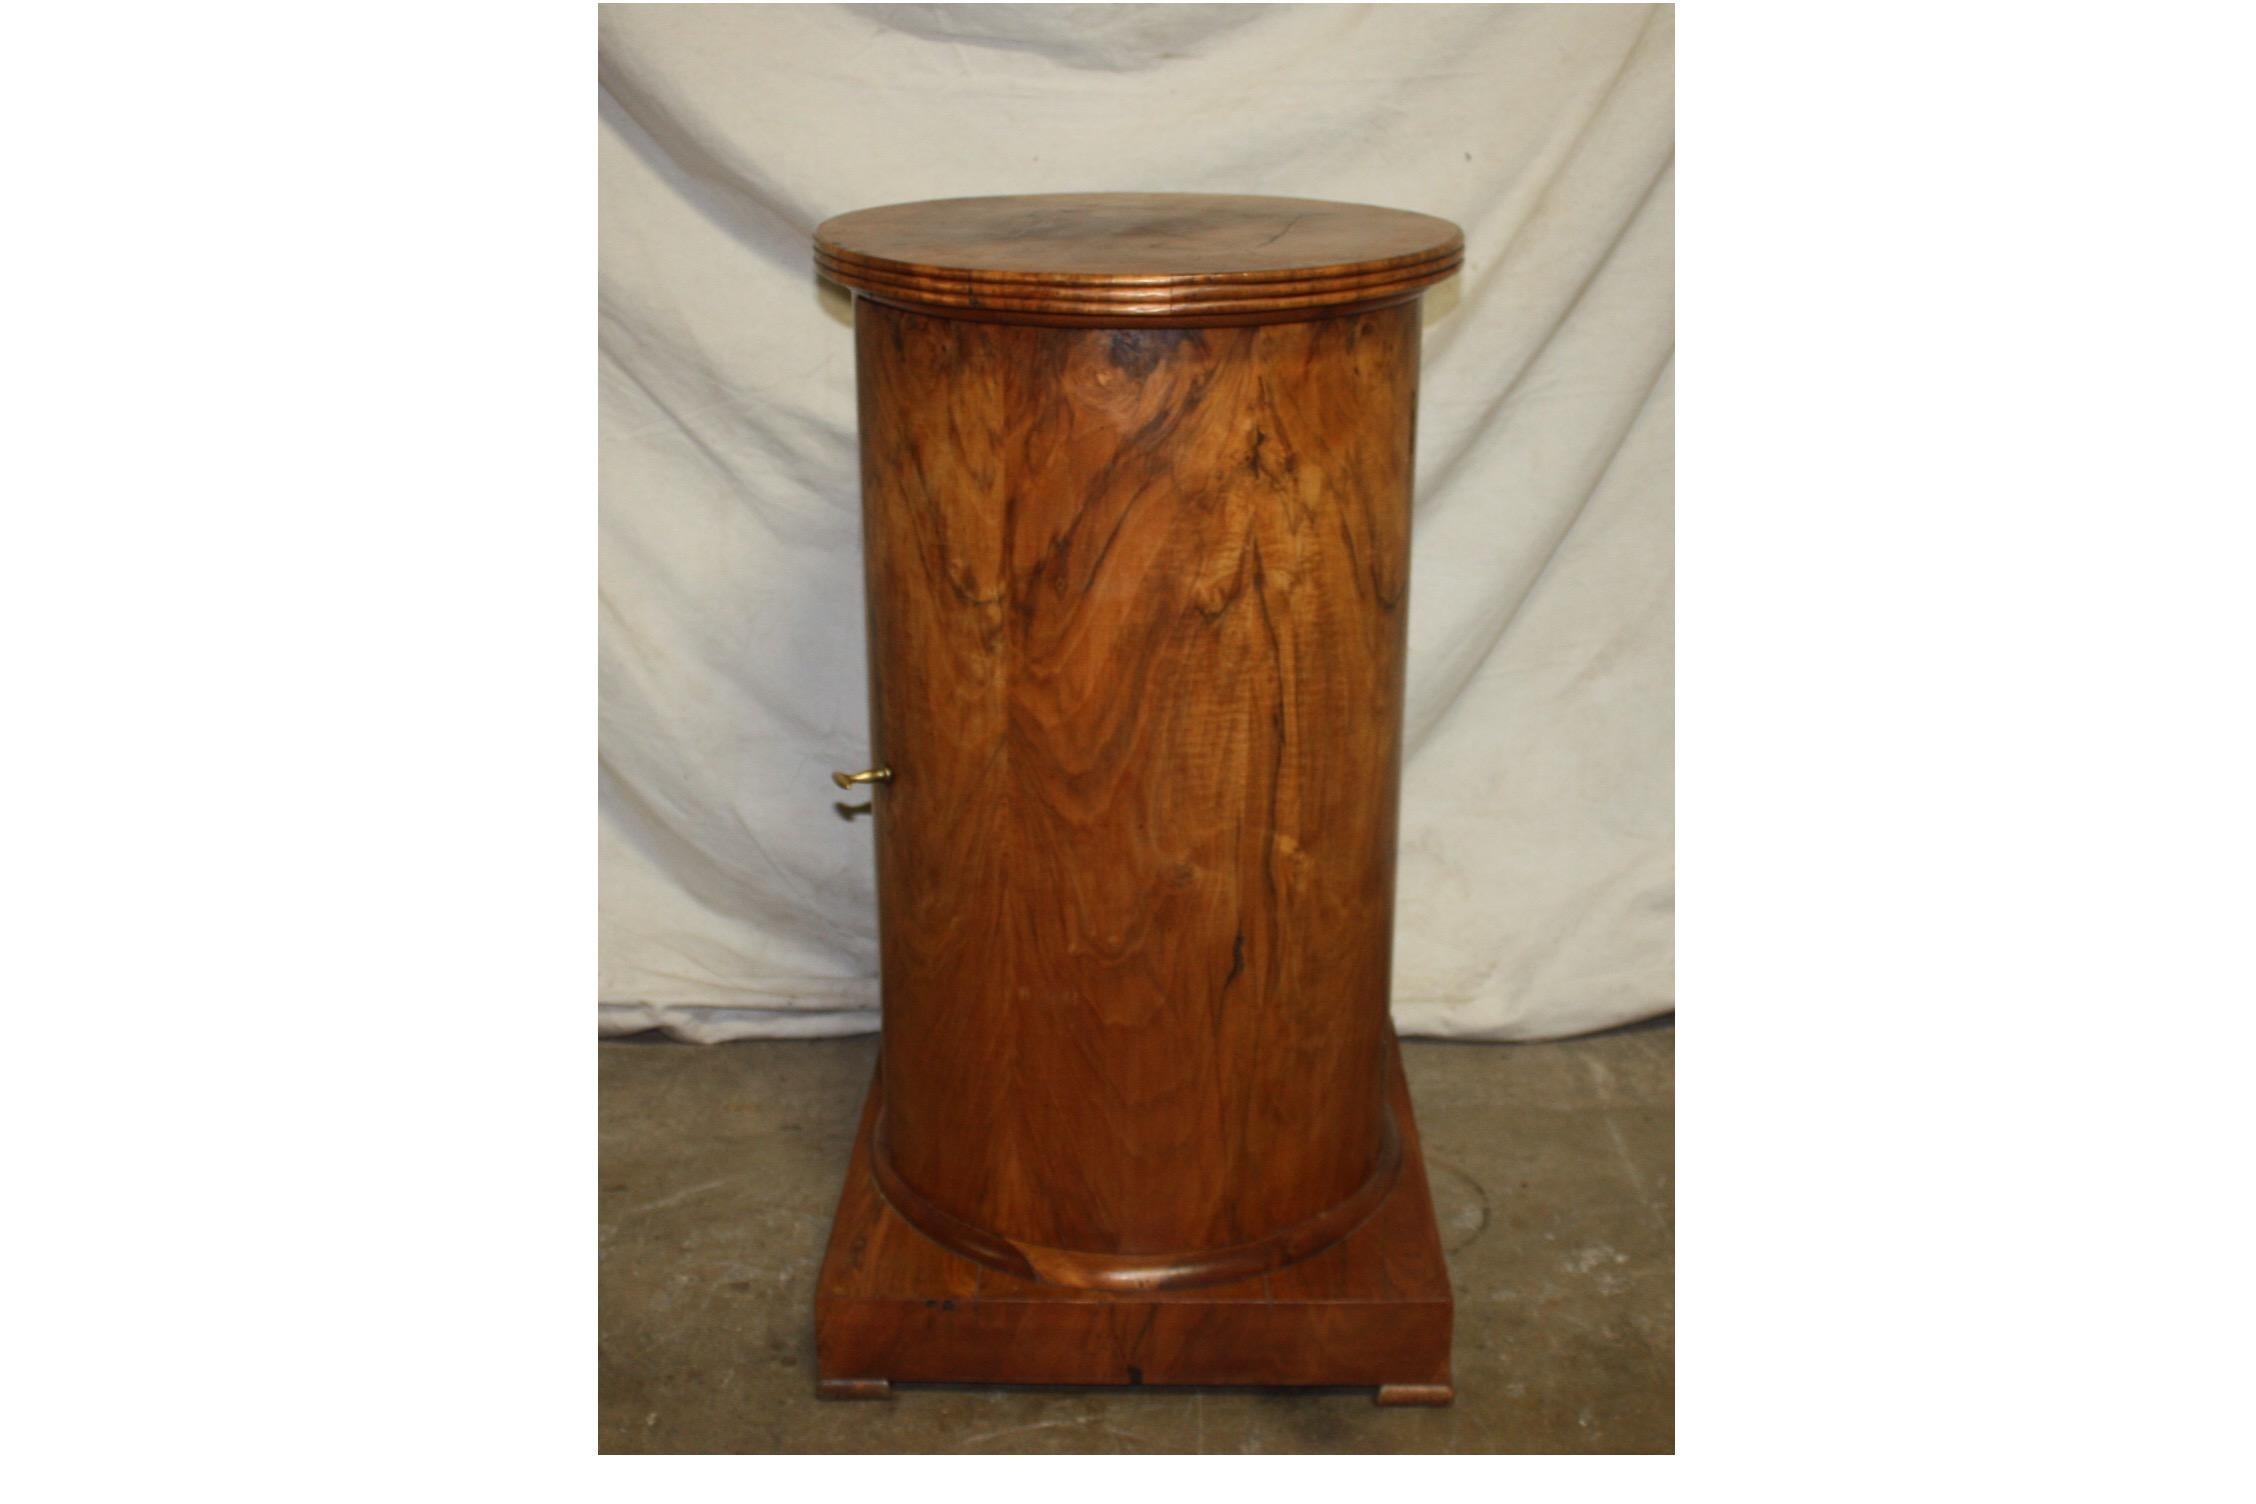 Charming 19th century French side table.